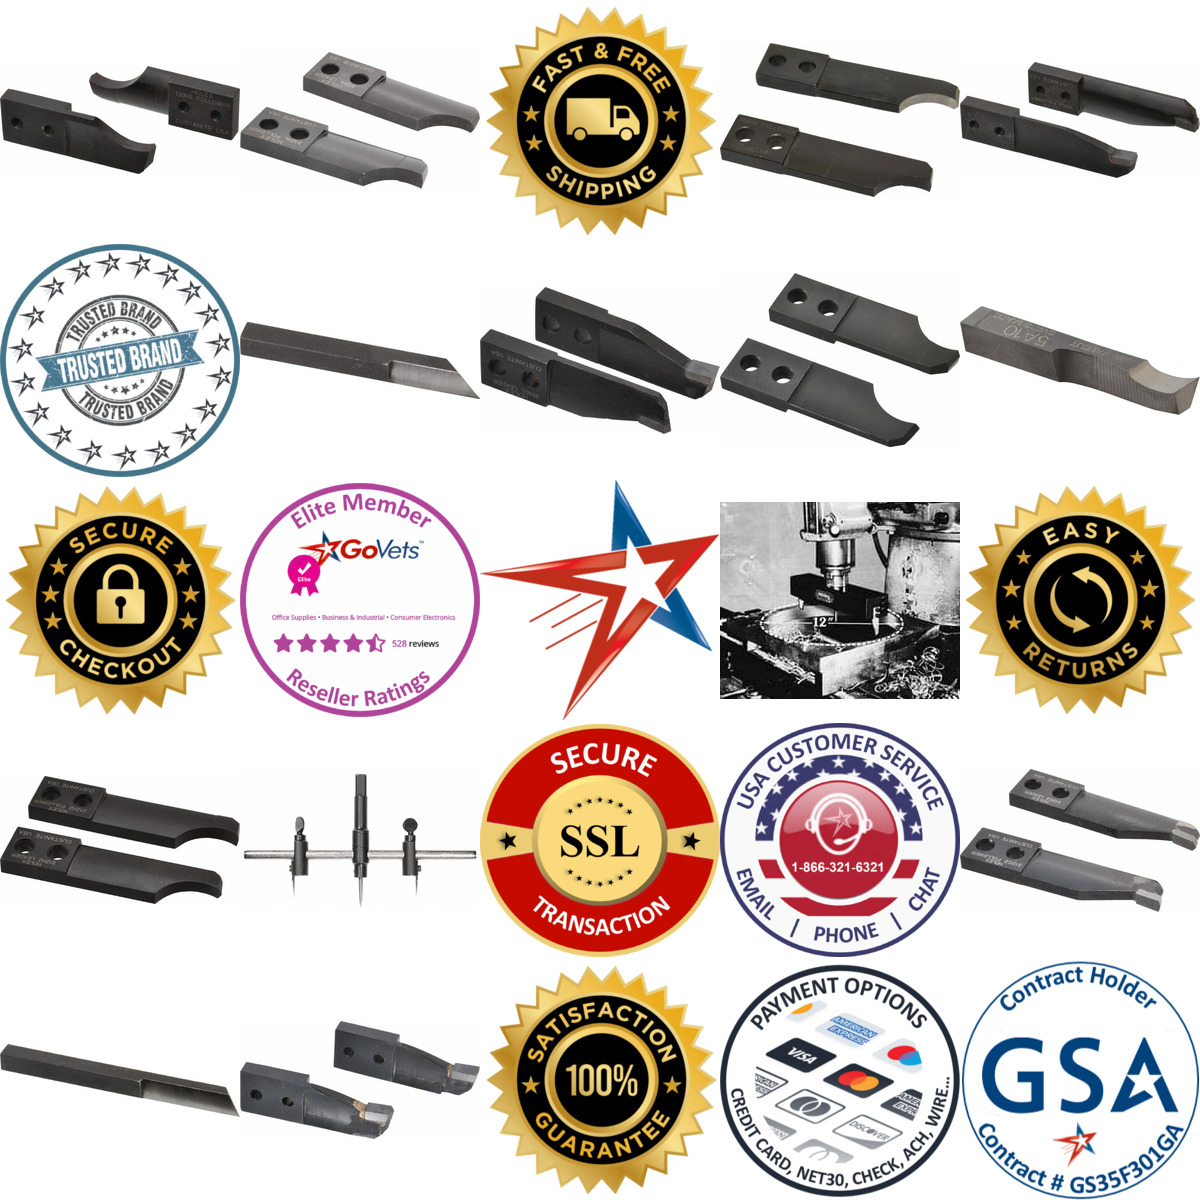 A selection of Circle Cutter and Trepanning Blades products on GoVets